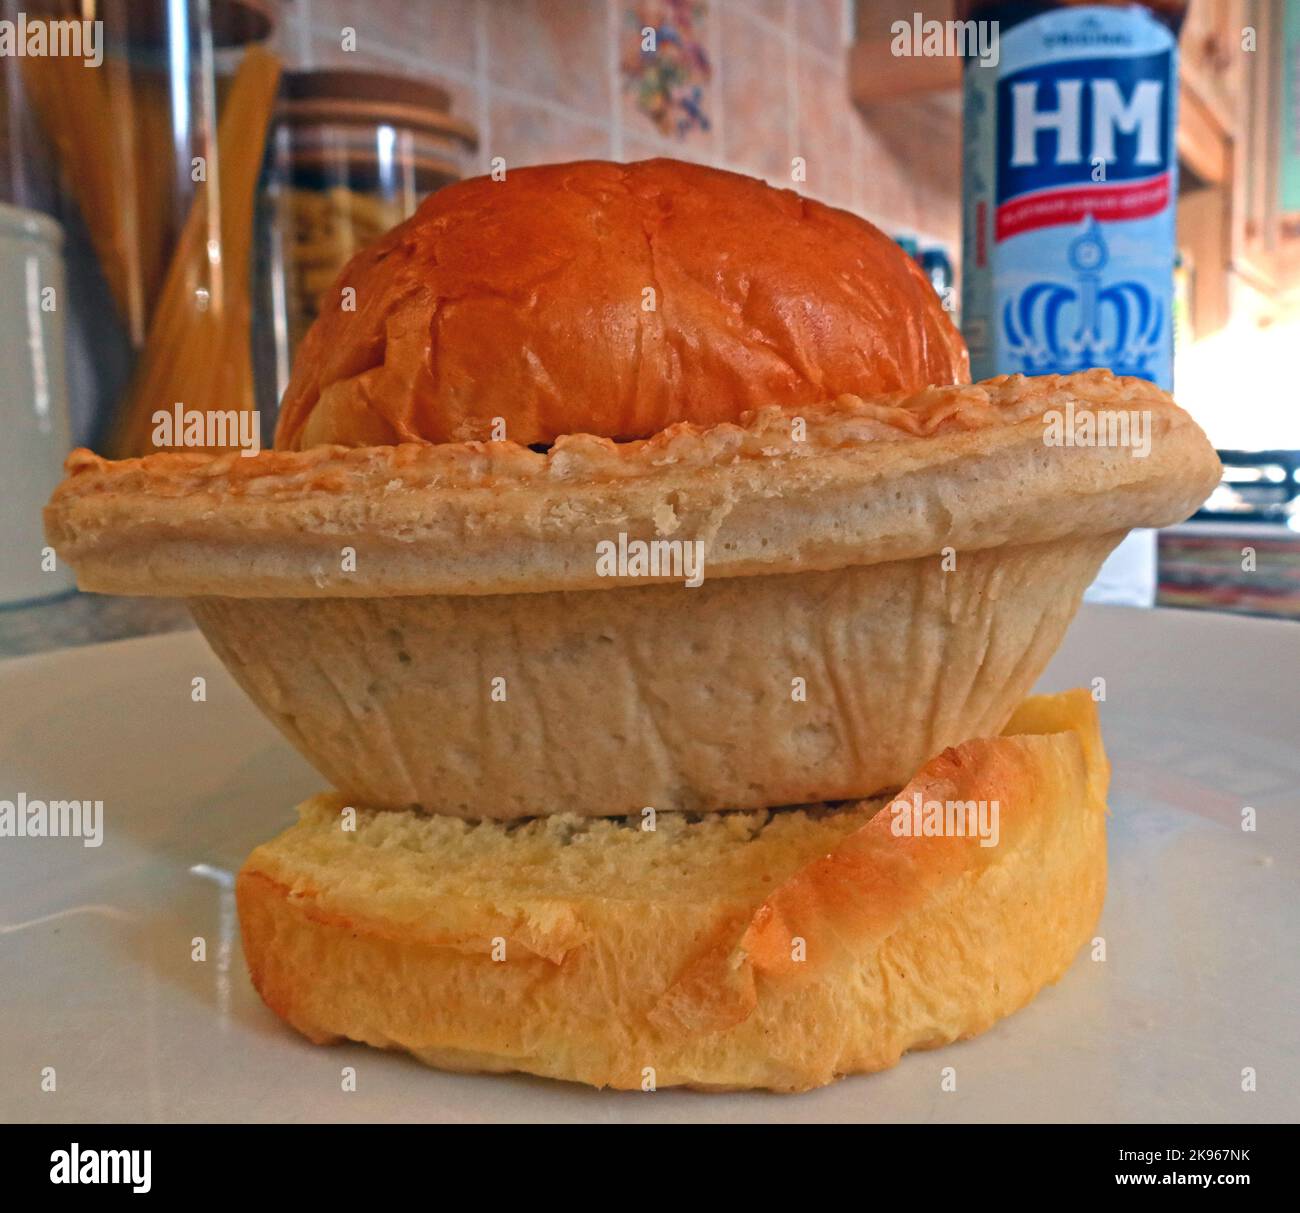 Wigan Lancashire Pie Burger, a steak or Meat pie on a oven bottom muffin, with HP Sauce bottle Stock Photo